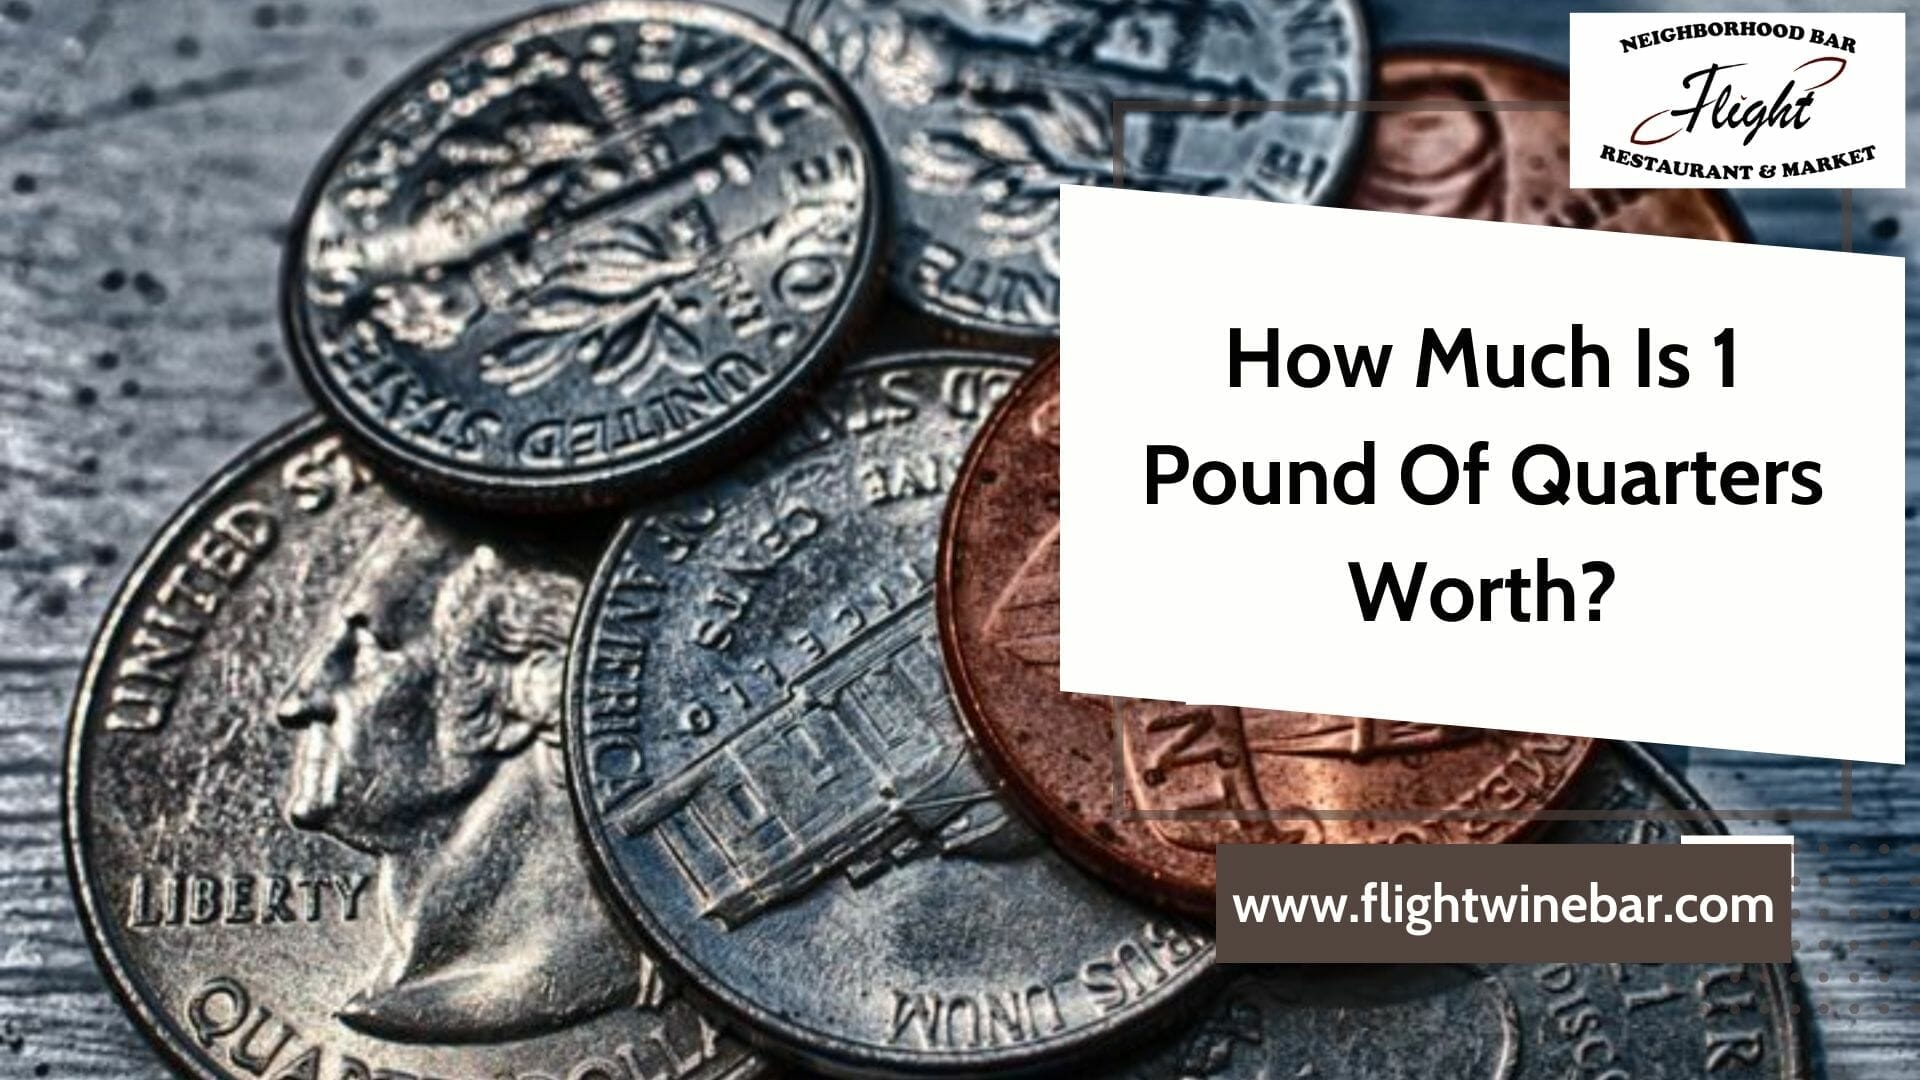 How Much Is 1 Pound Of Quarters Worth